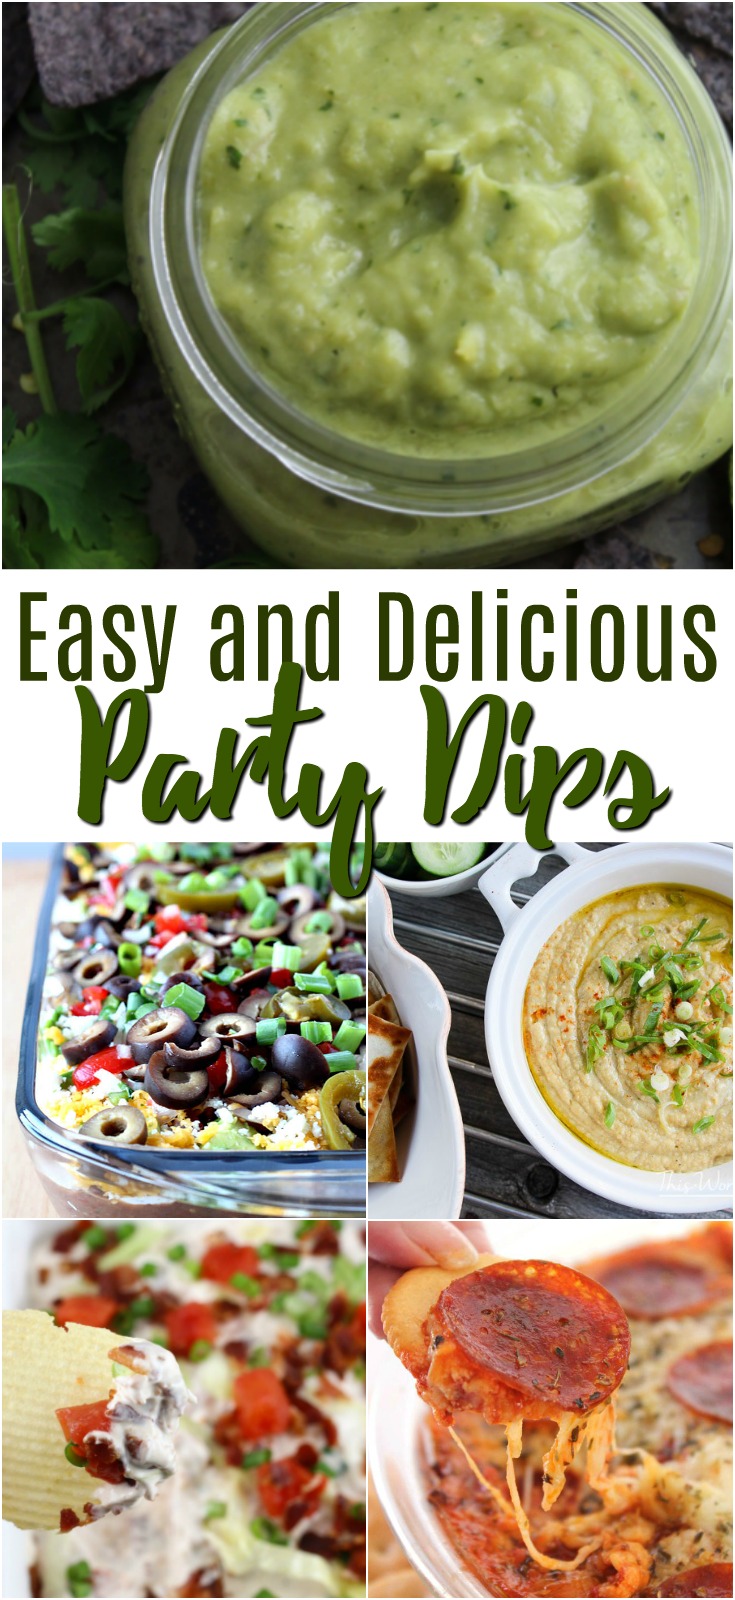 Easy and Delicious Party Dips